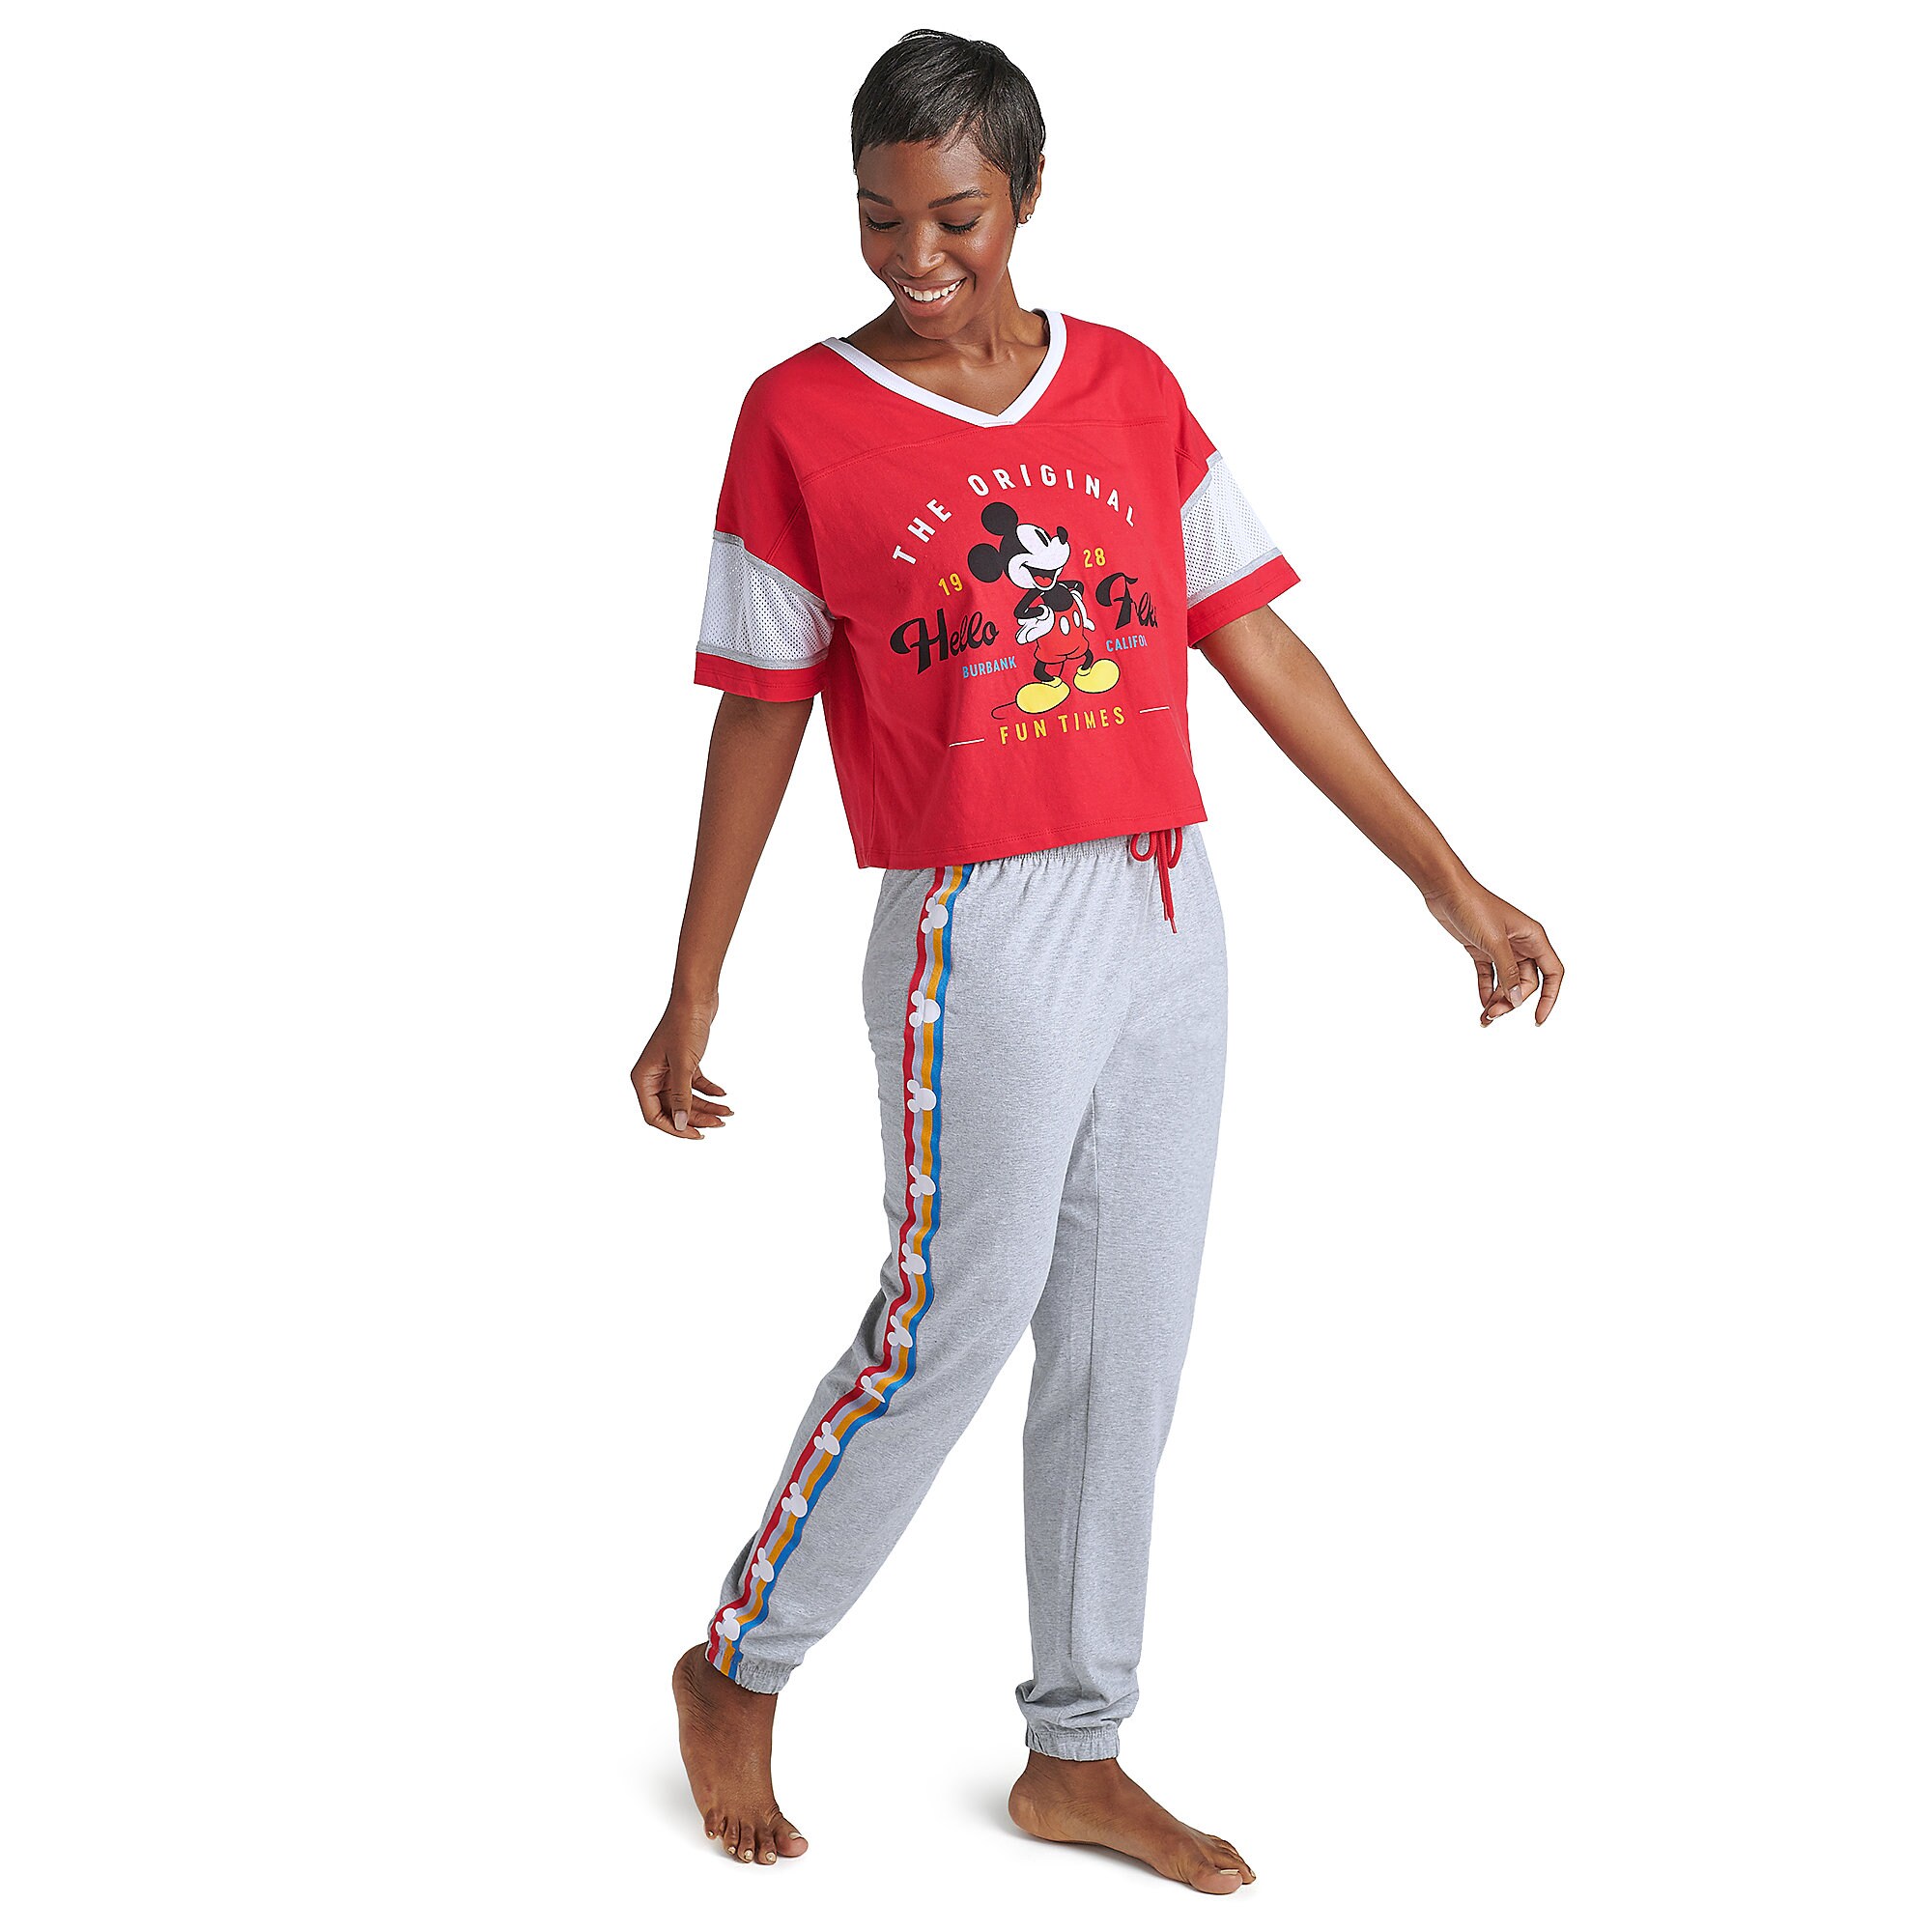 Mickey Mouse Pajama Set for Women